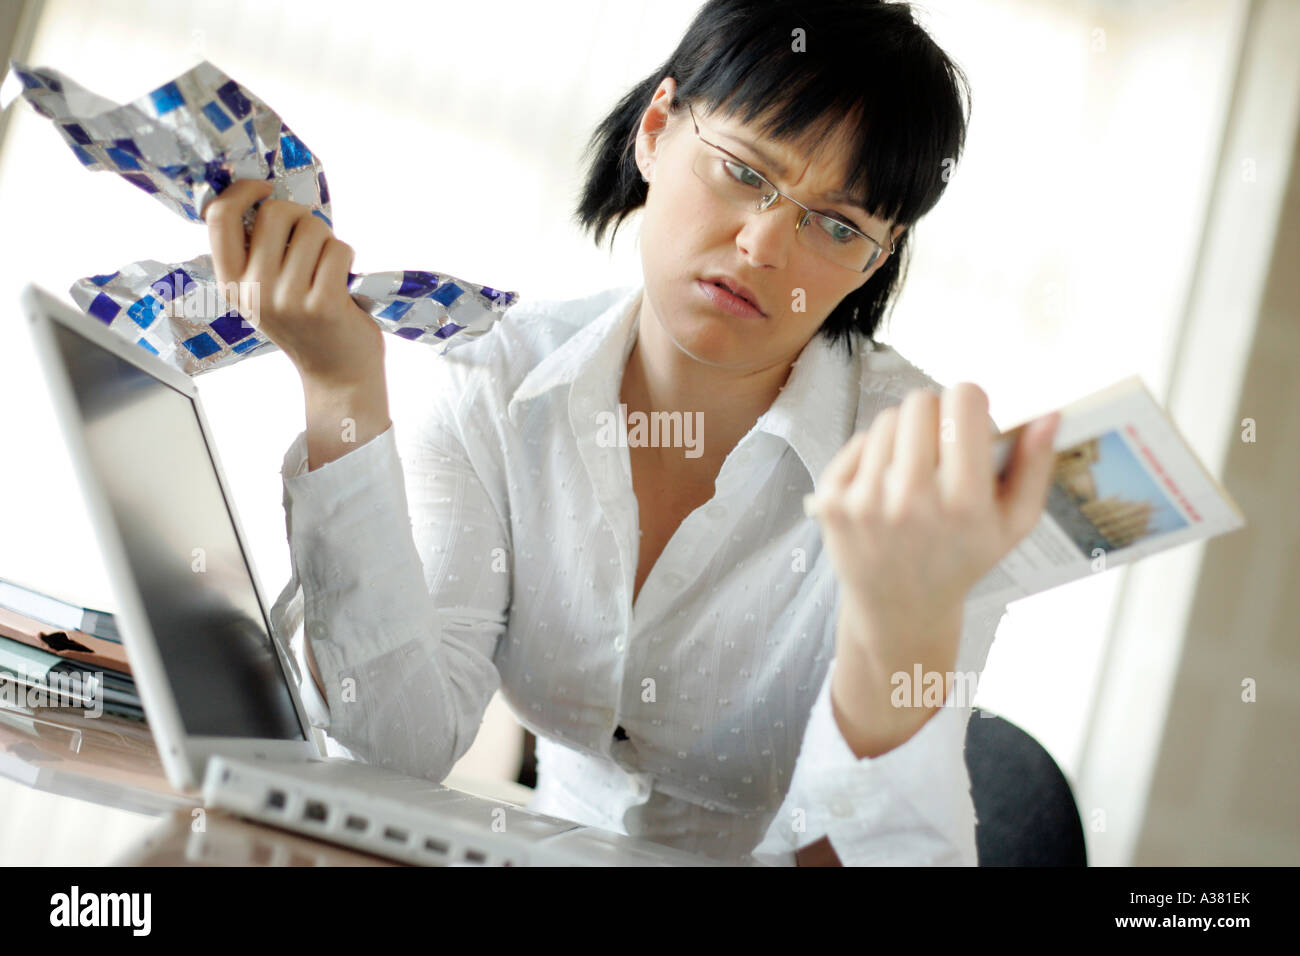 woman in the office looking annoyed with a present she has just unwrapped Stock Photo